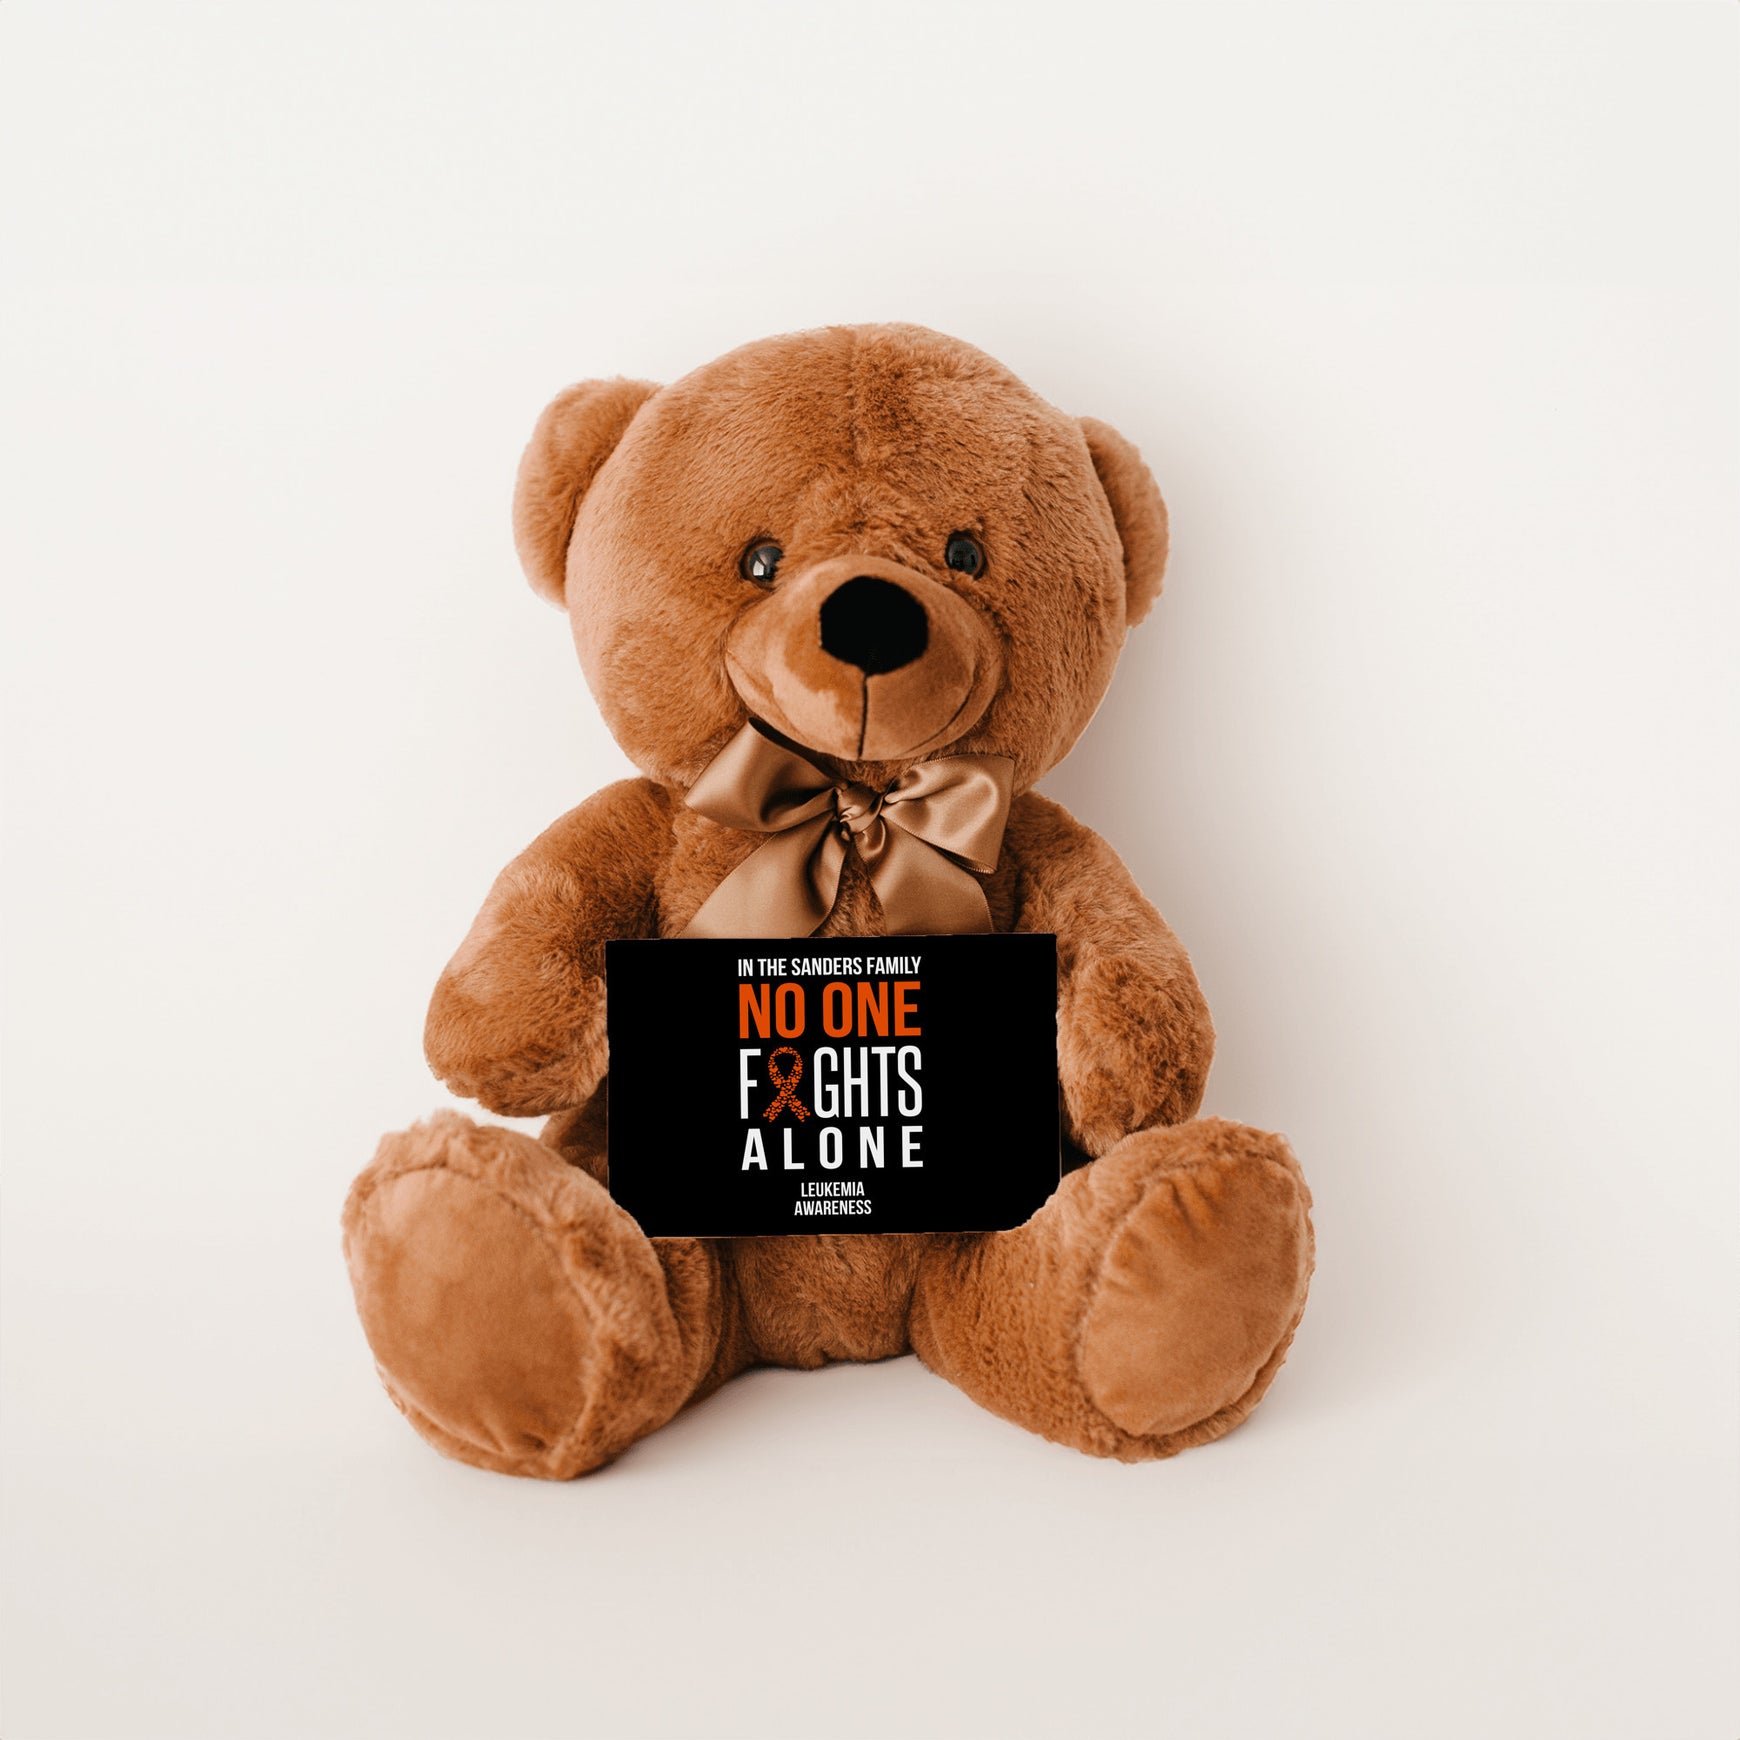 In This Family No One Fights Alone Leukemia Teddy Bear - Personalized - PRICE INCLUDES FREE SHIPPING